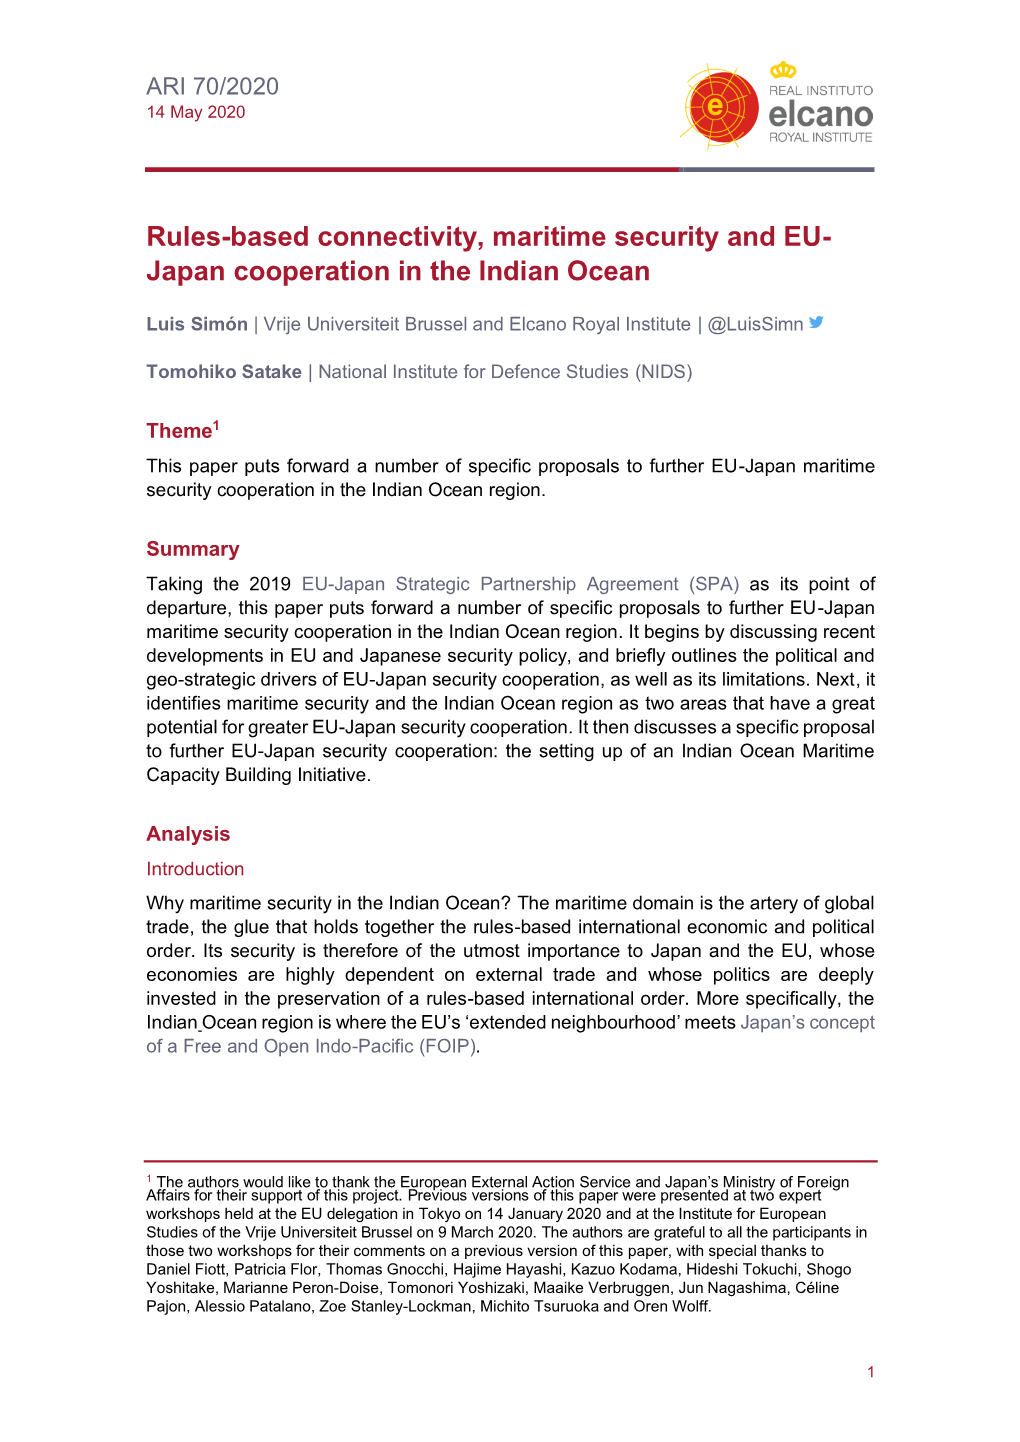 Rules-Based Connectivity, Maritime Security and EU-Japan Cooperation in the Indian Ocean ARI 70/2020 - 14/5/2020 - Elcano Royal Institute